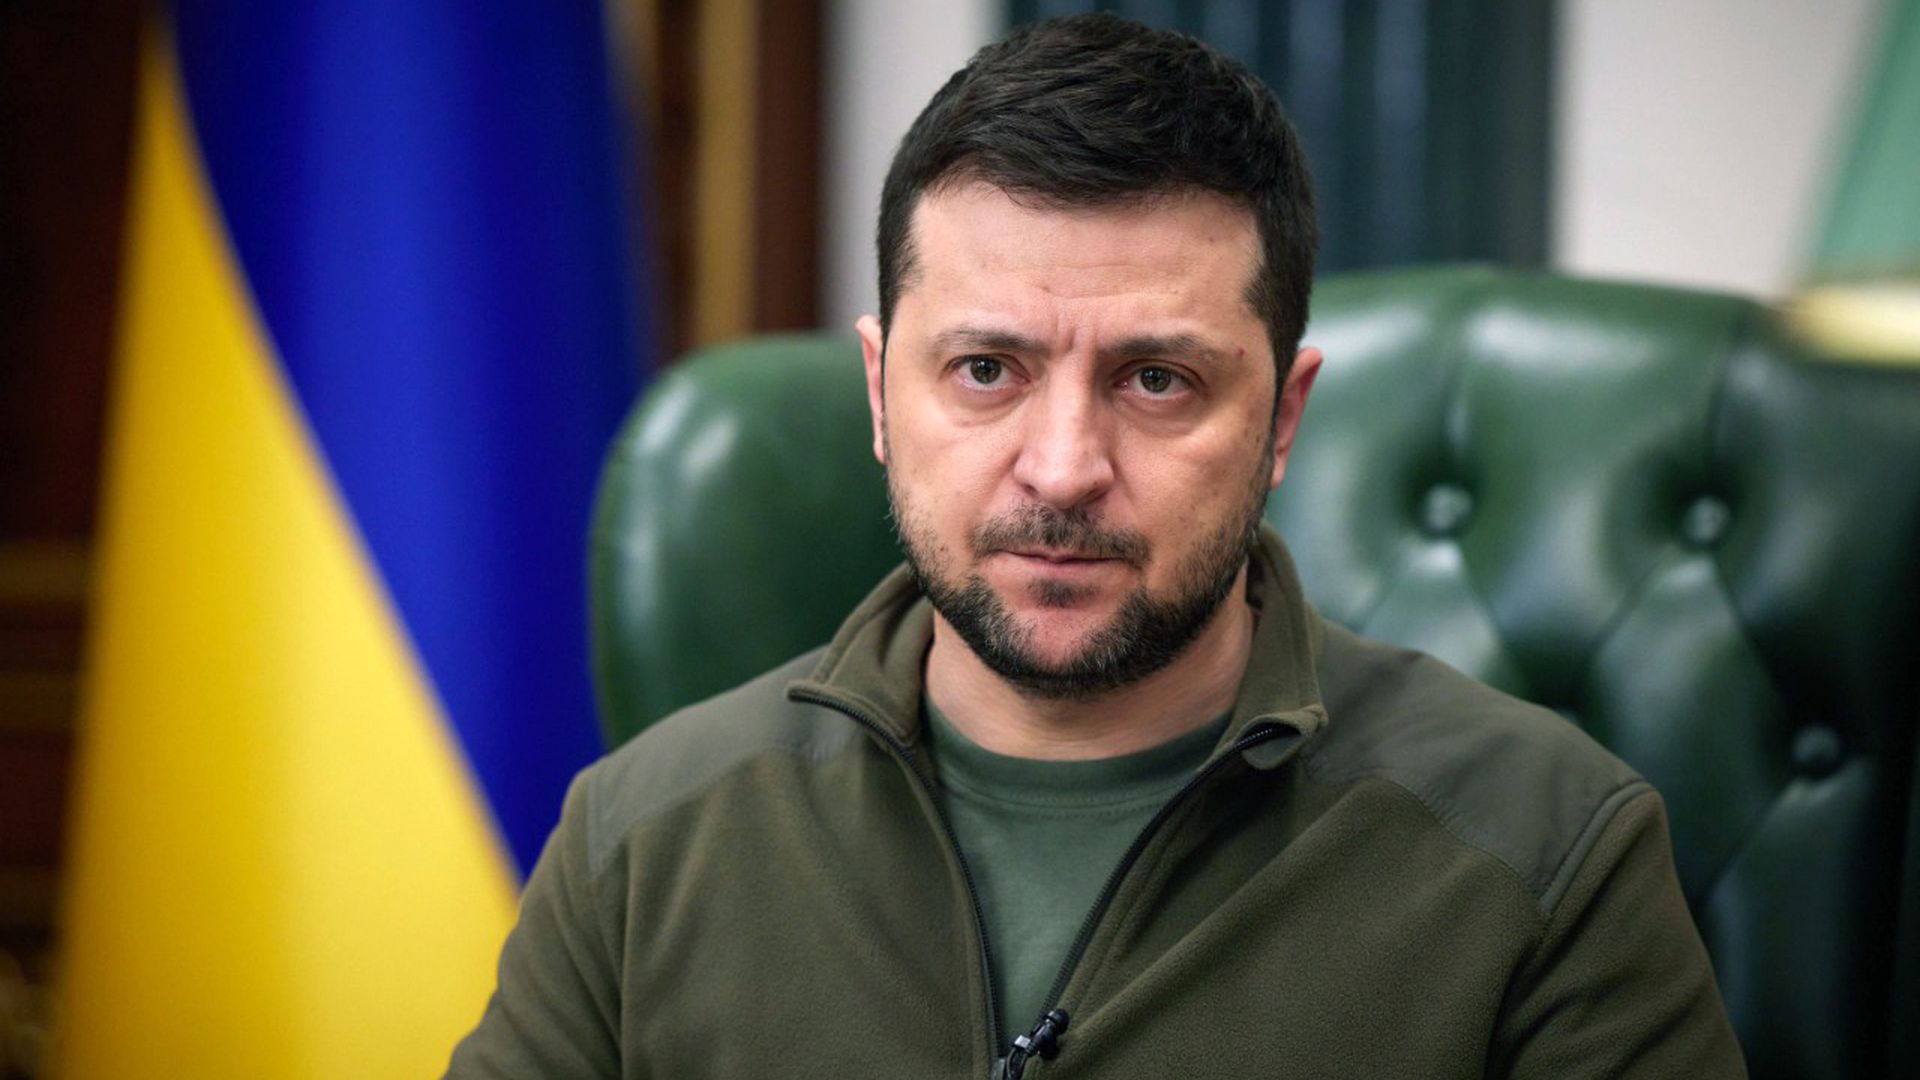 President of Ukraine Volodymyr Zelenskyy is pictured during his regular address to the nation on March 11, 2022.